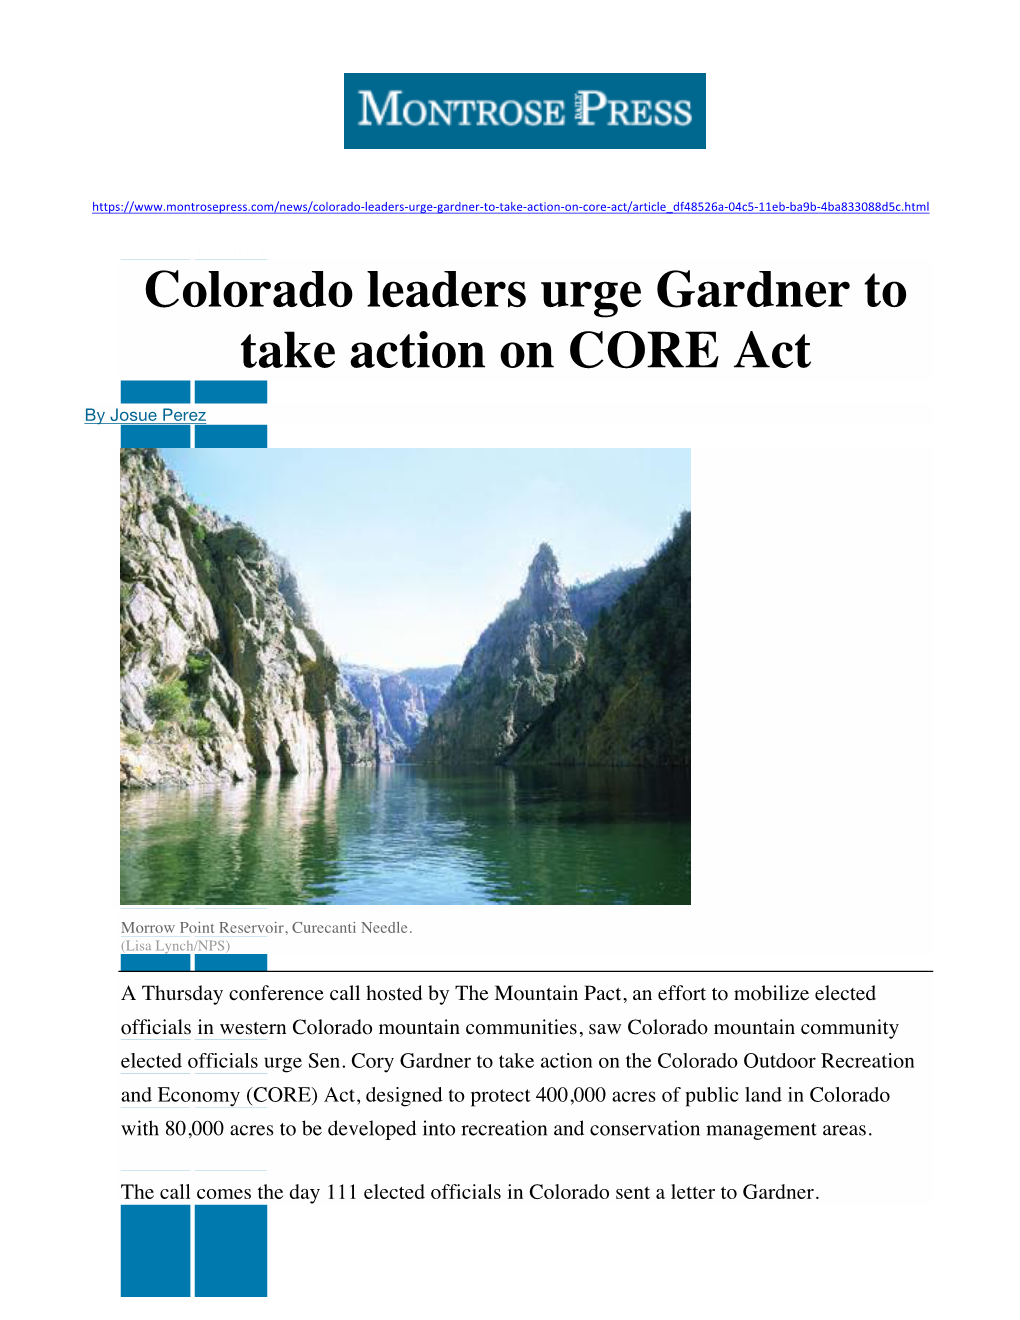 Colorado Leaders Urge Gardner to Take Action on CORE Act